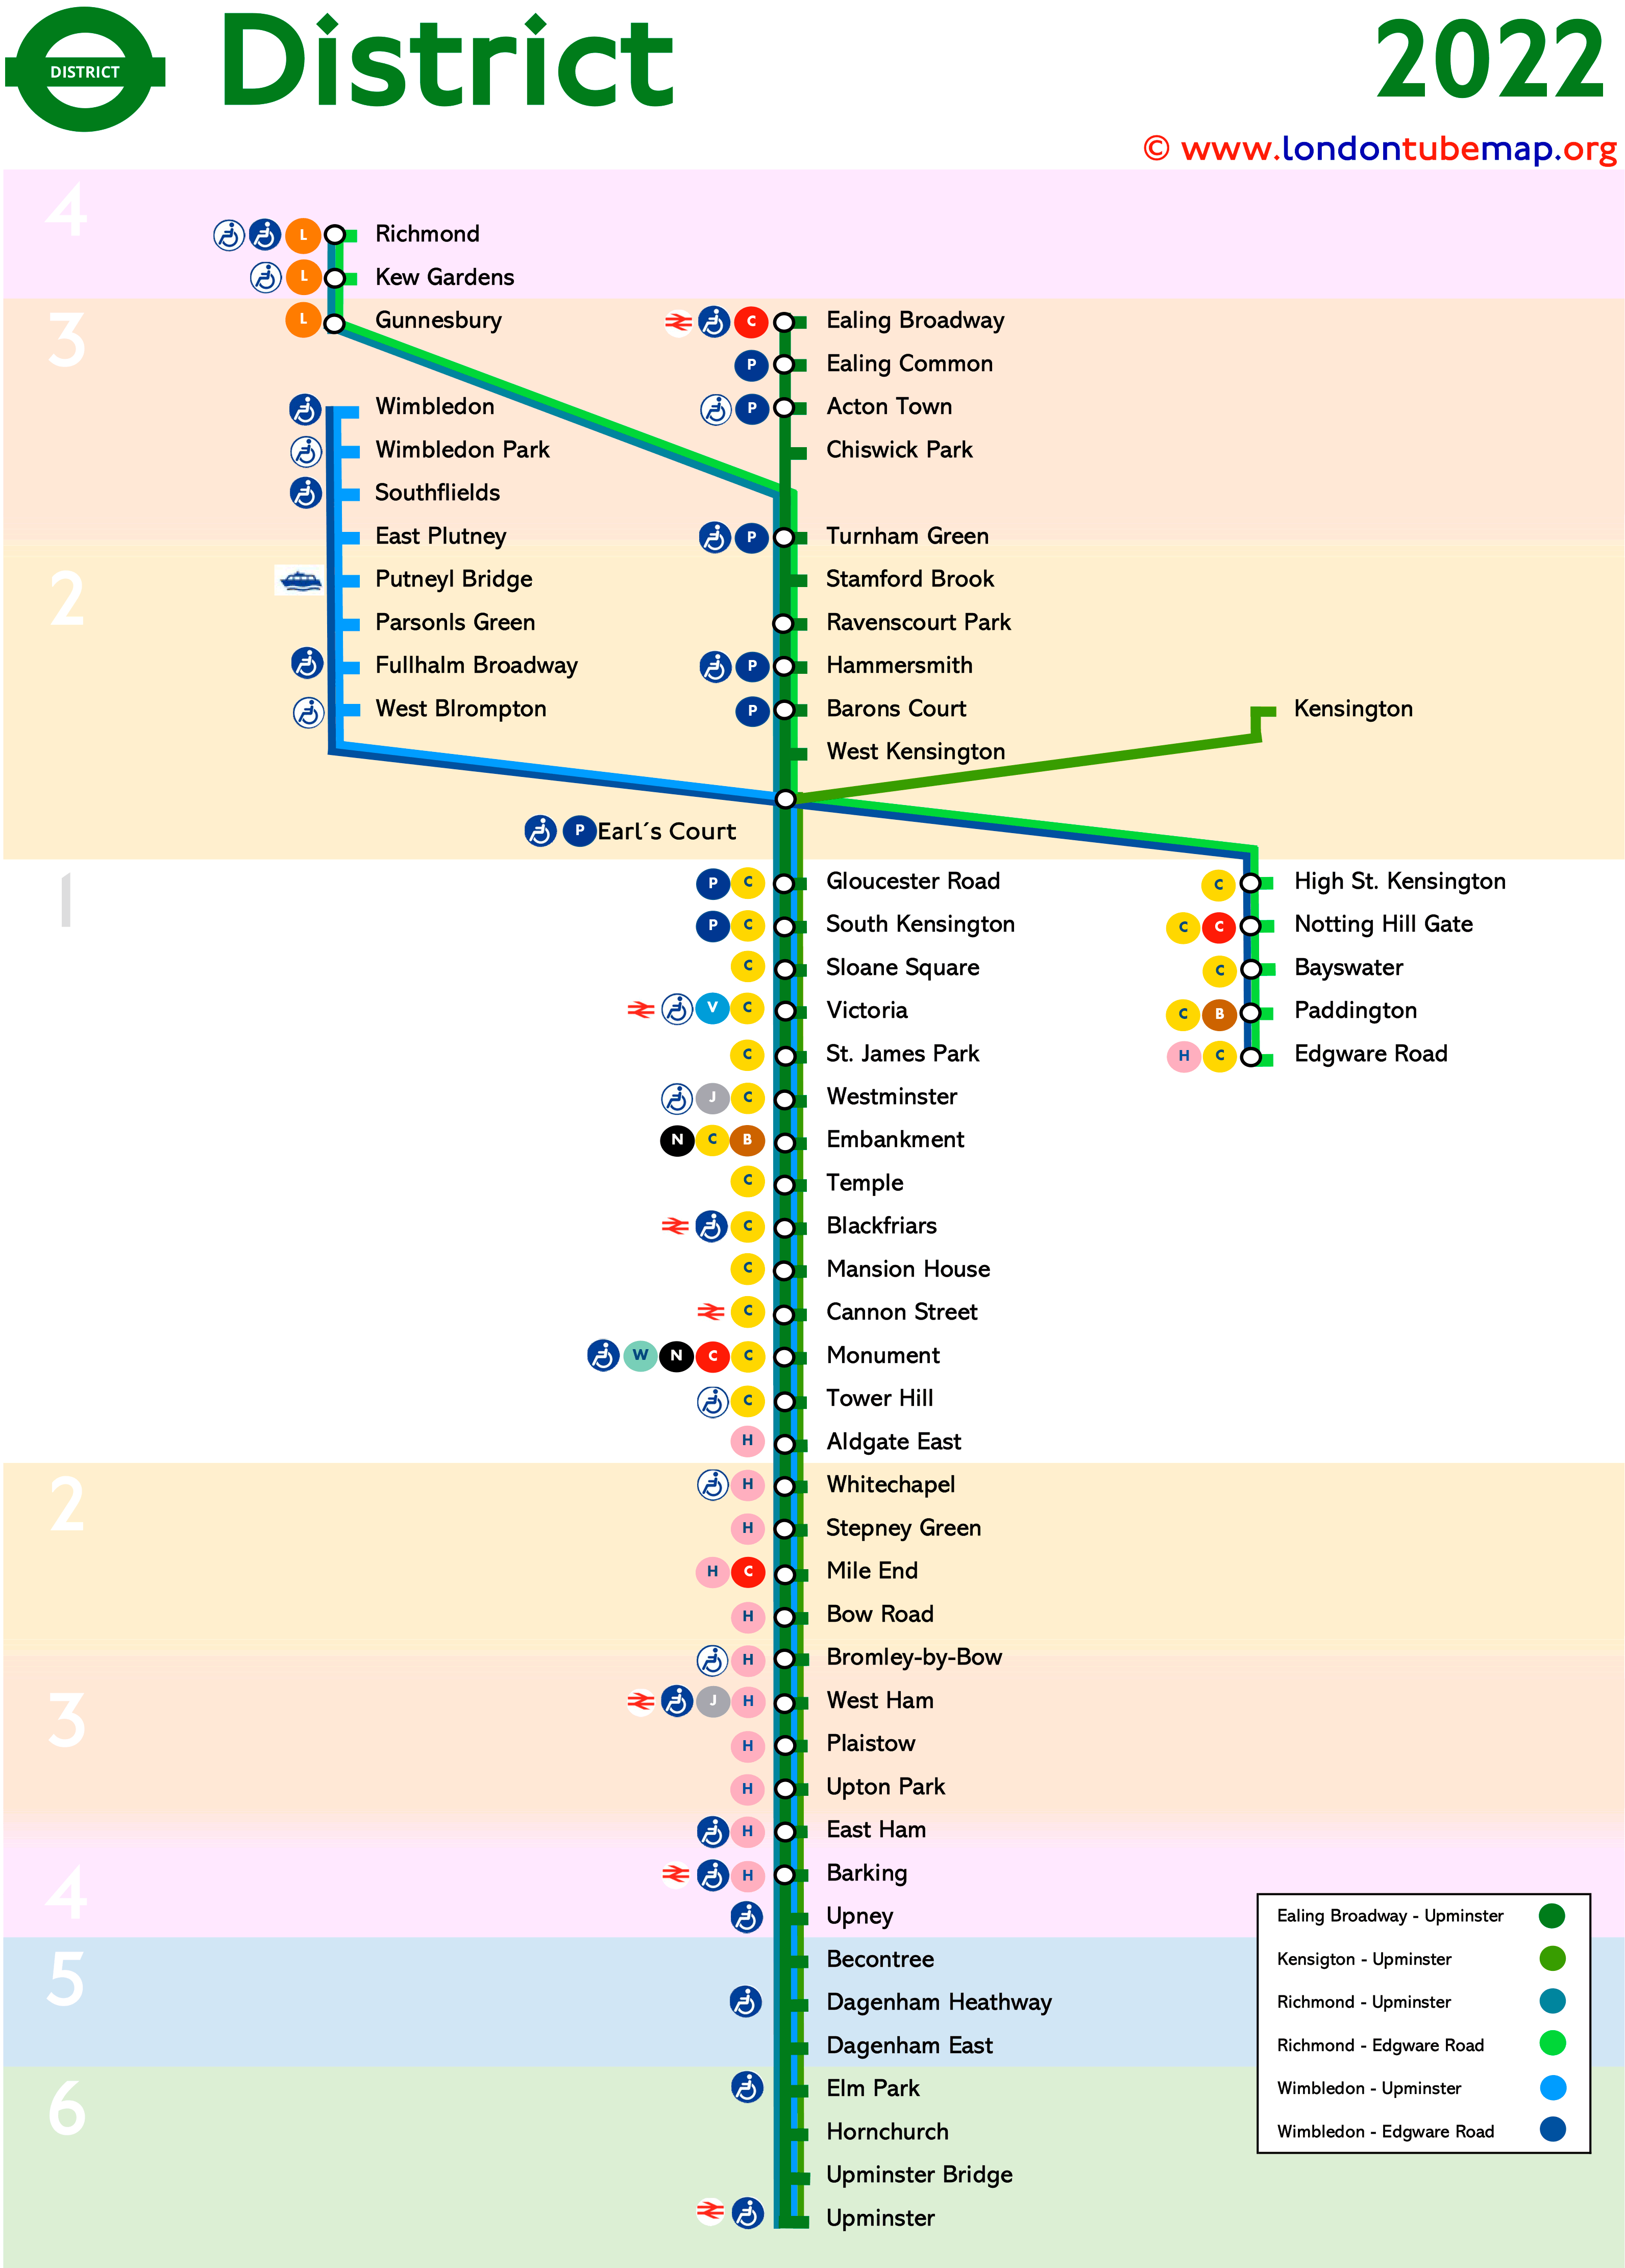 Disctrict tube line vertical map 2022